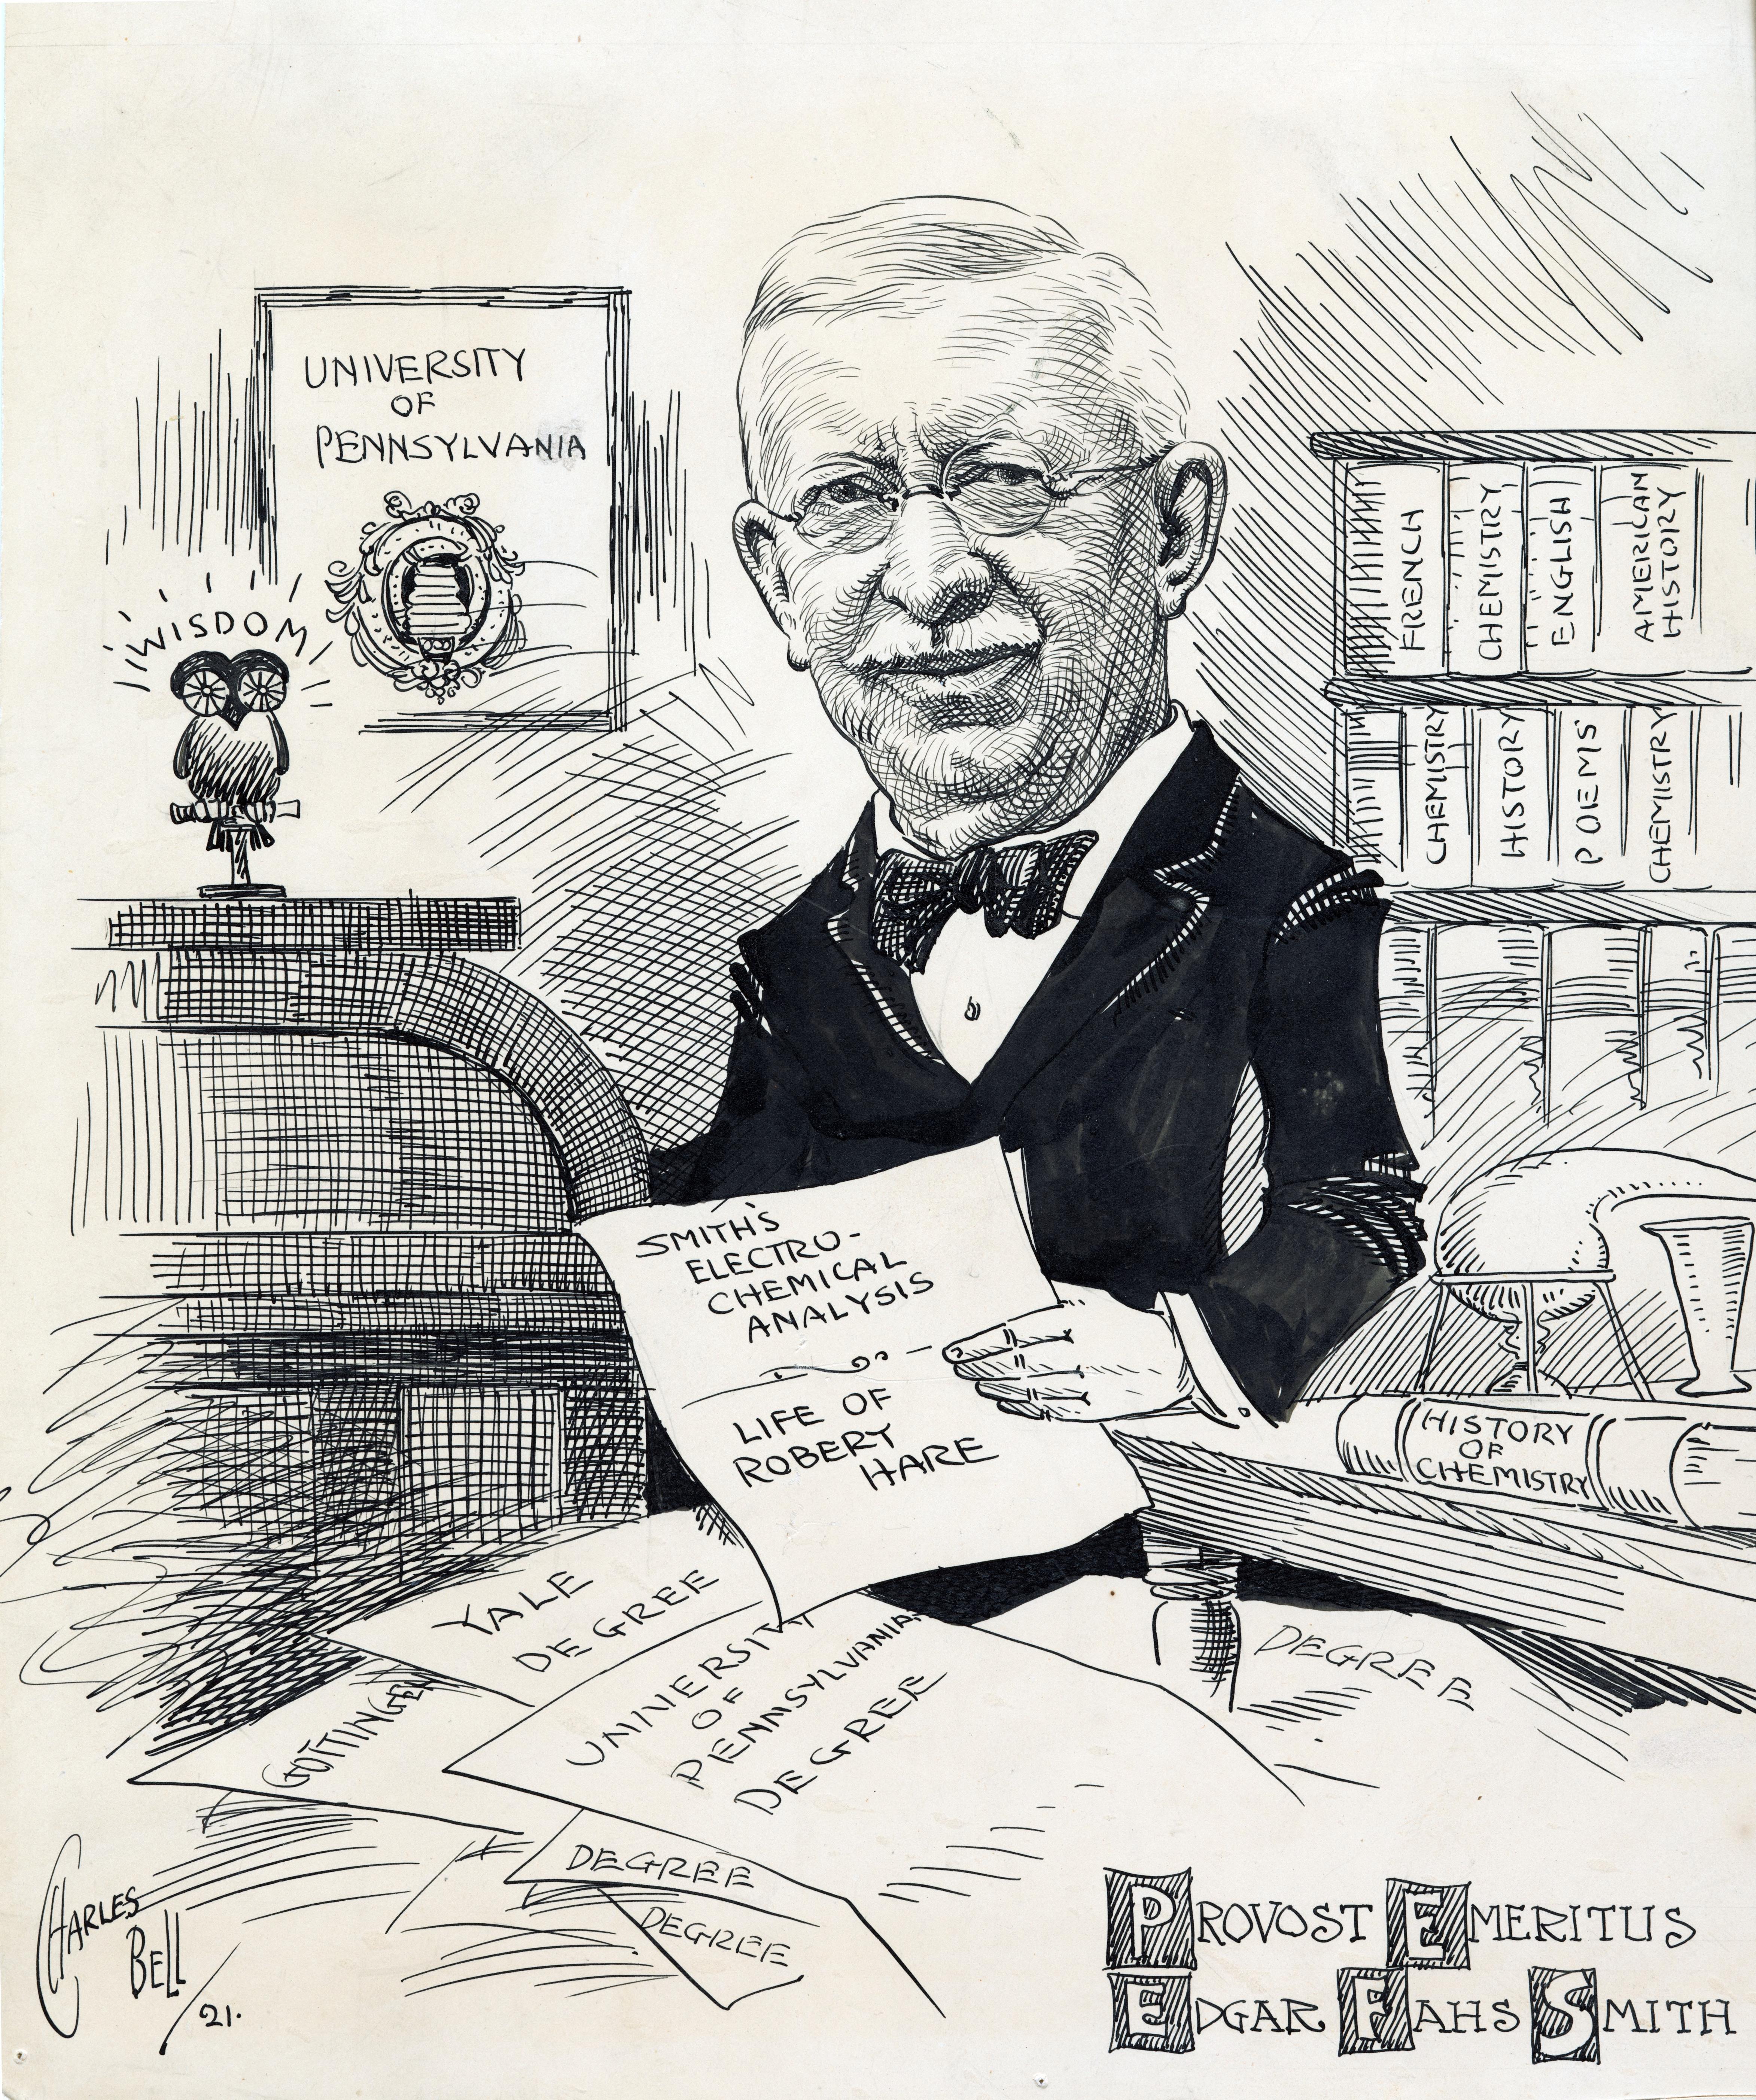 smith drawn as a cartoon in his office. surrounded by books that say french, chemistry, english, american history, chemistry, history, poems, chemistry. holding paper that says "Smiths electro-chemical analysis, life of robert hare." other papers on his desk read university of Pennsylvania degree, yale degree, gottingen, degree, degree, degree. framed seal behind him with "University of Pennsylvania" written above, next to an owl under the words "wisdom"